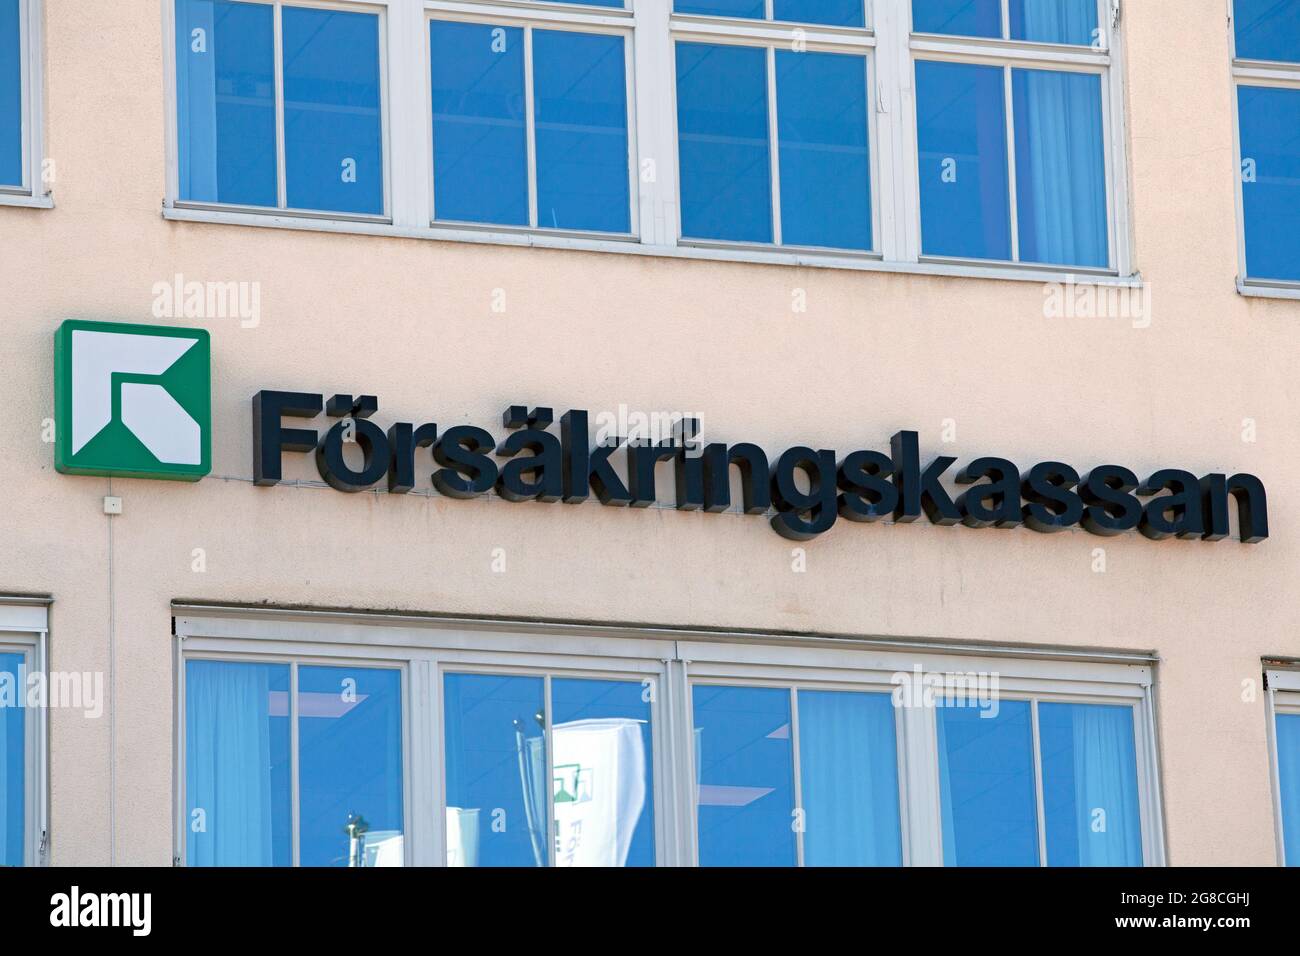 Stockholm, Sweden - Mars 25, 2021: Wall sign for Försäkringskassan, Swedish Social Insurance Agency who are partly in charge of social wellfare and be Stock Photo